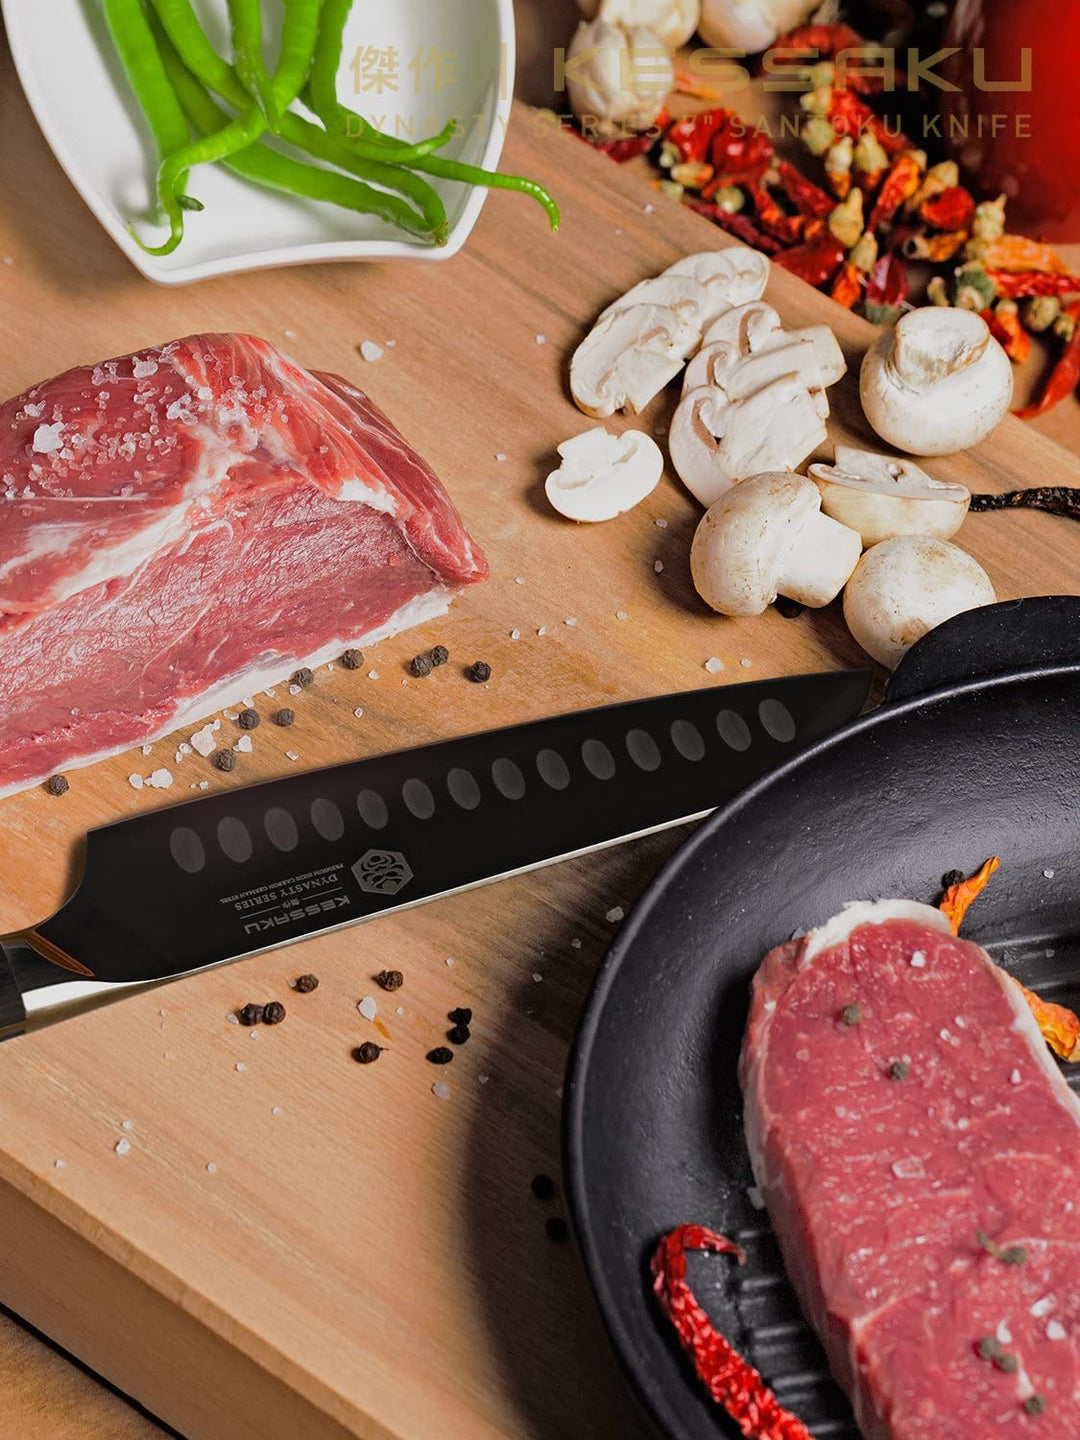 The Dynasty Santoku used to prepare steak, mushrooms, and green beans